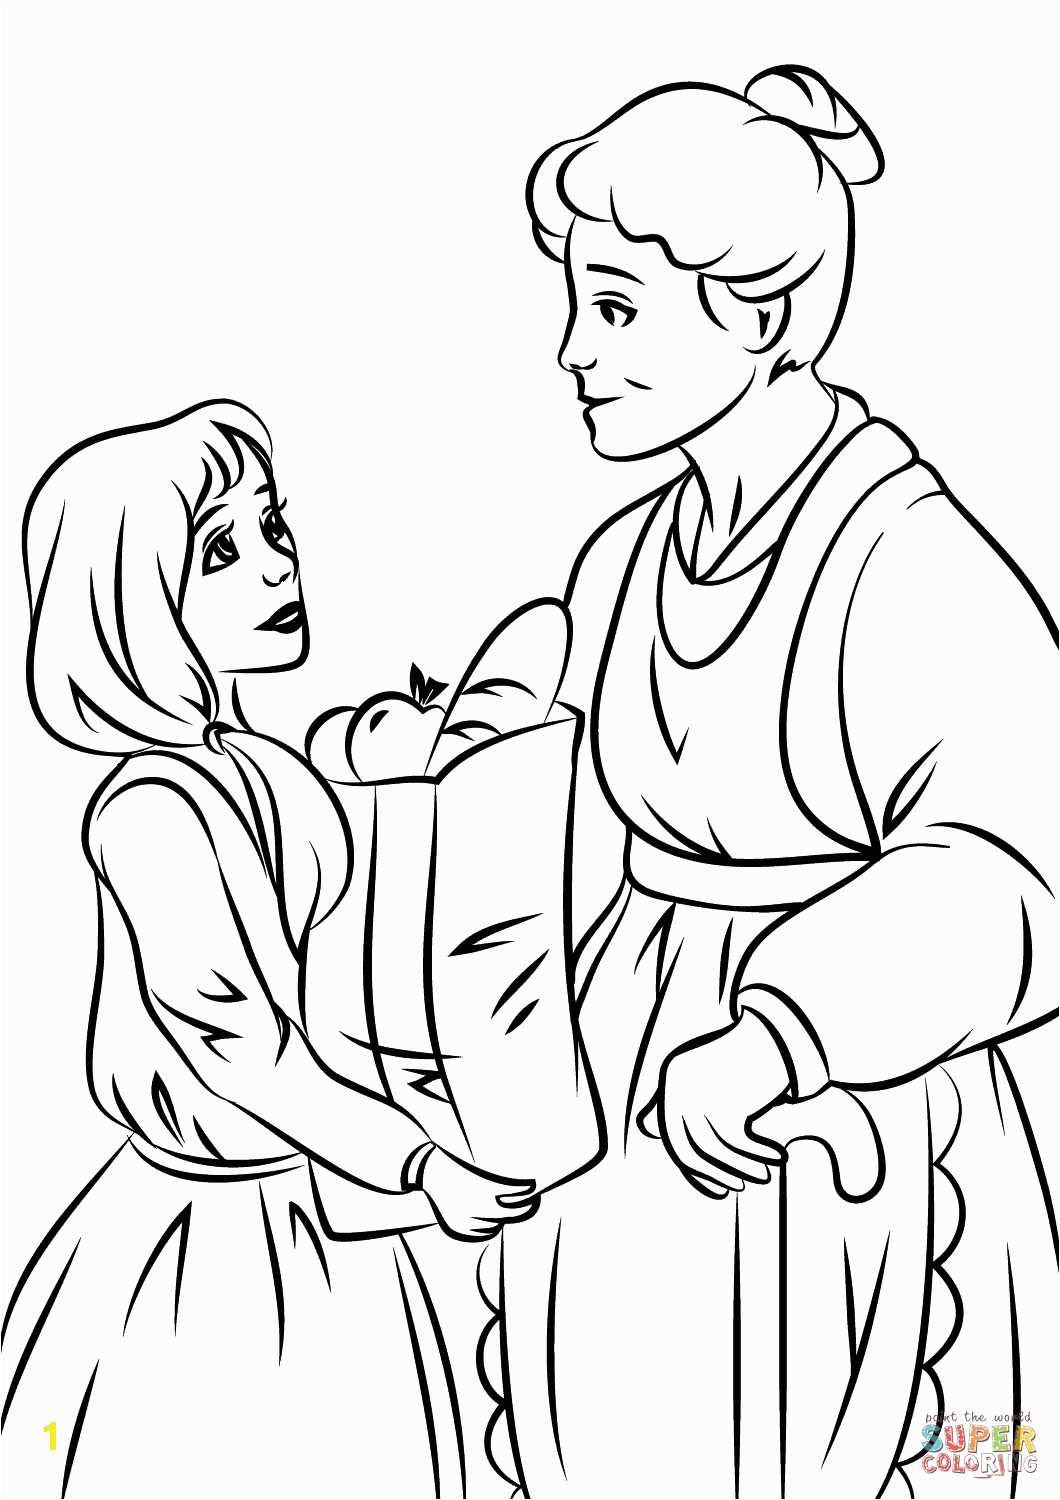 Free Printable Coloring Pages Helping Others Helping Others Coloring Page